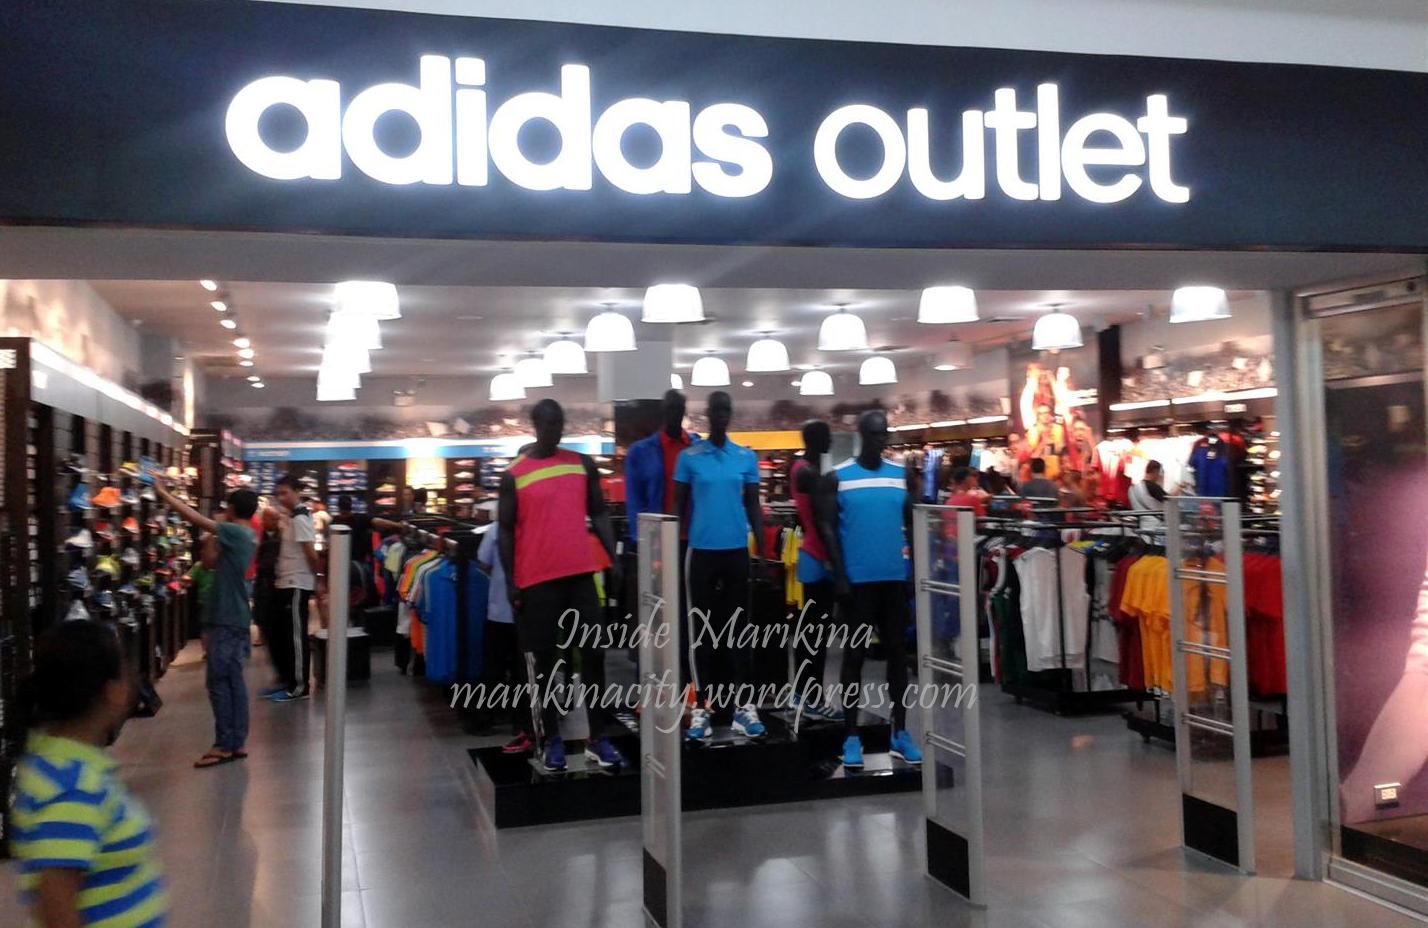 adidas factory outlet canada